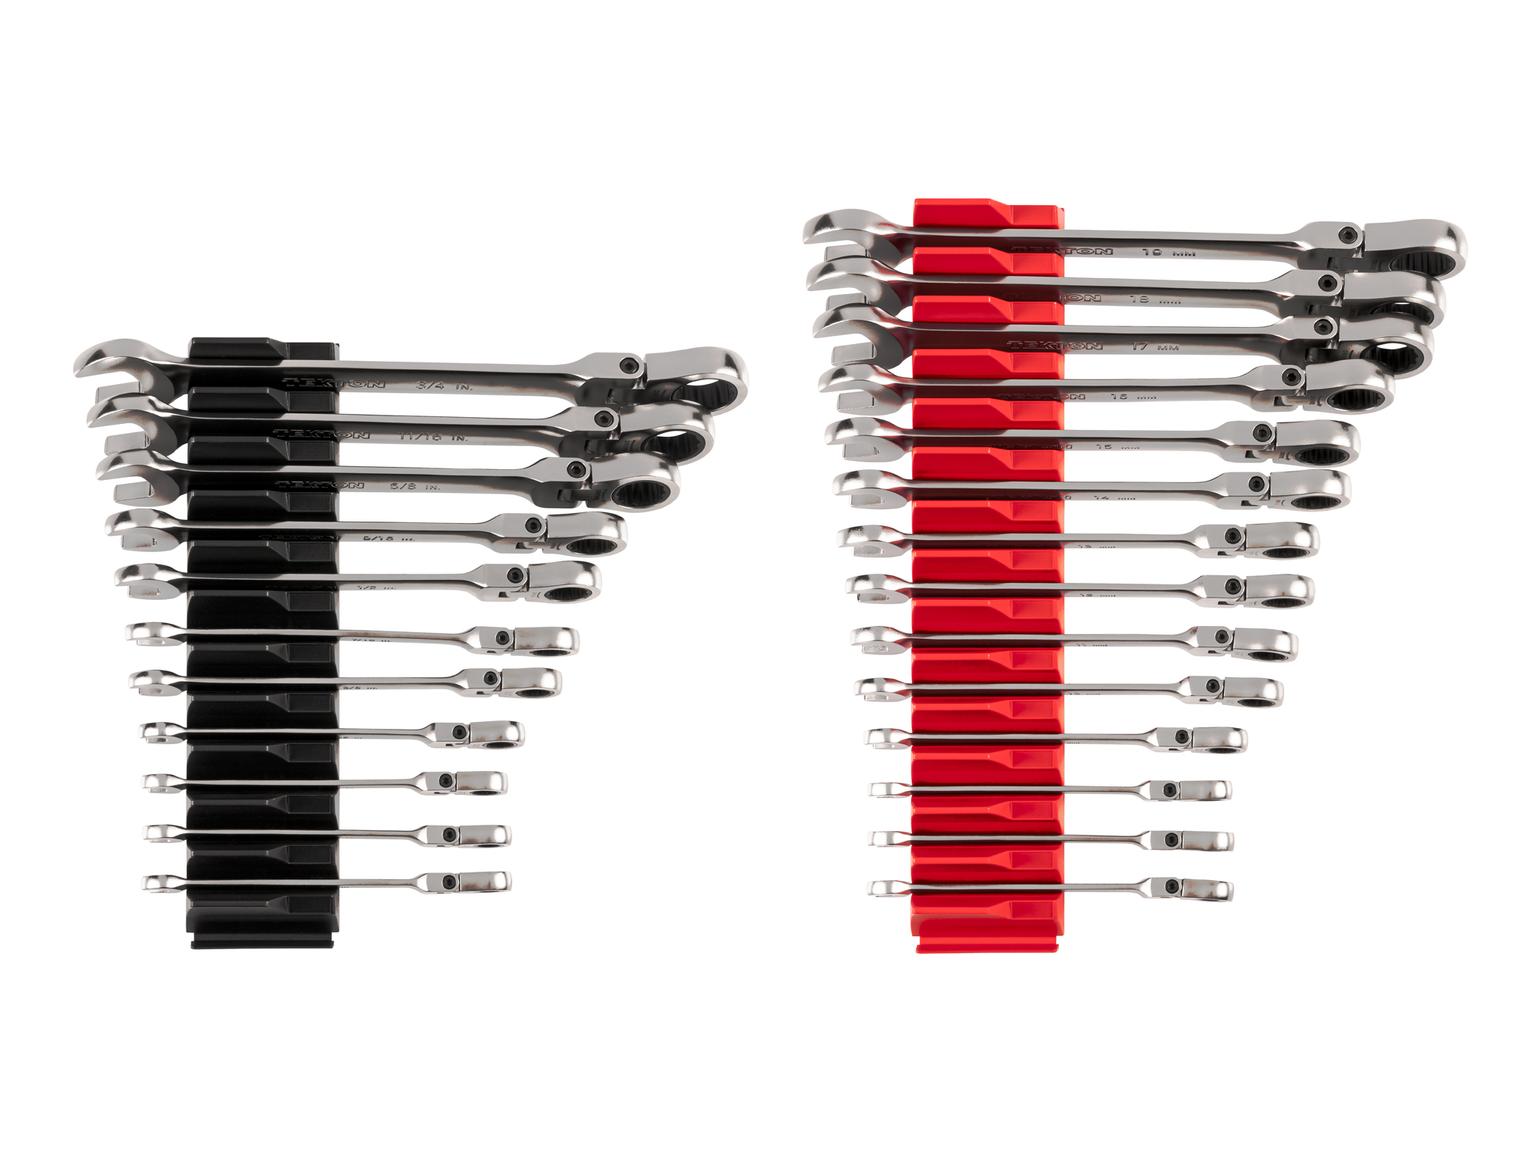 Flex Head 12-Point Ratcheting Combination Wrench Set, 25-Piece (Modular Slotted Organizer)